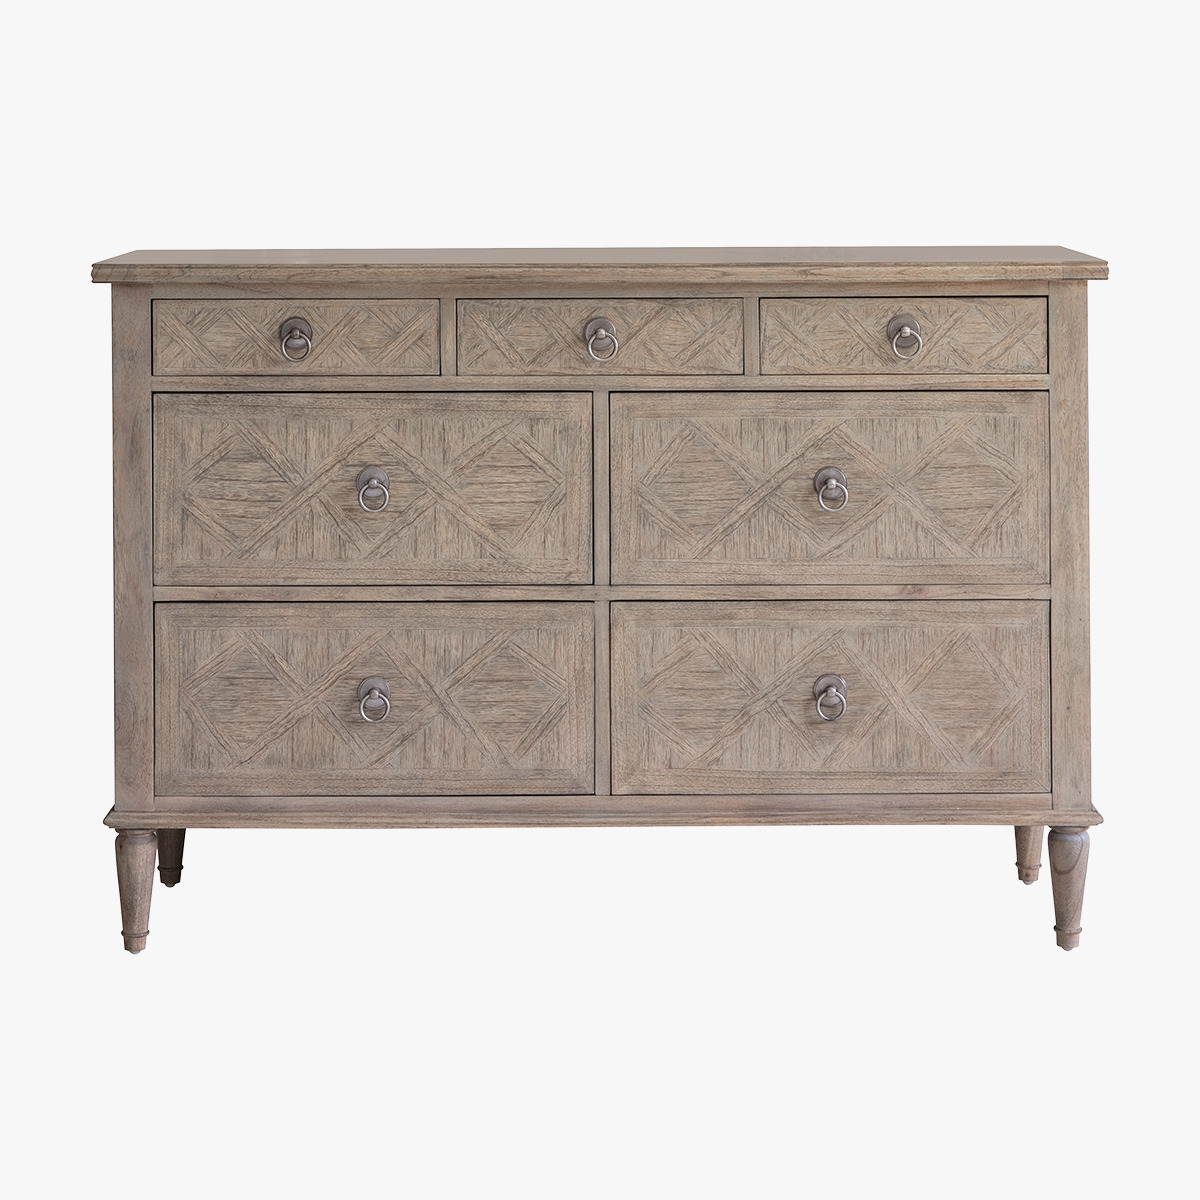 Juno Chest of Seven Drawers